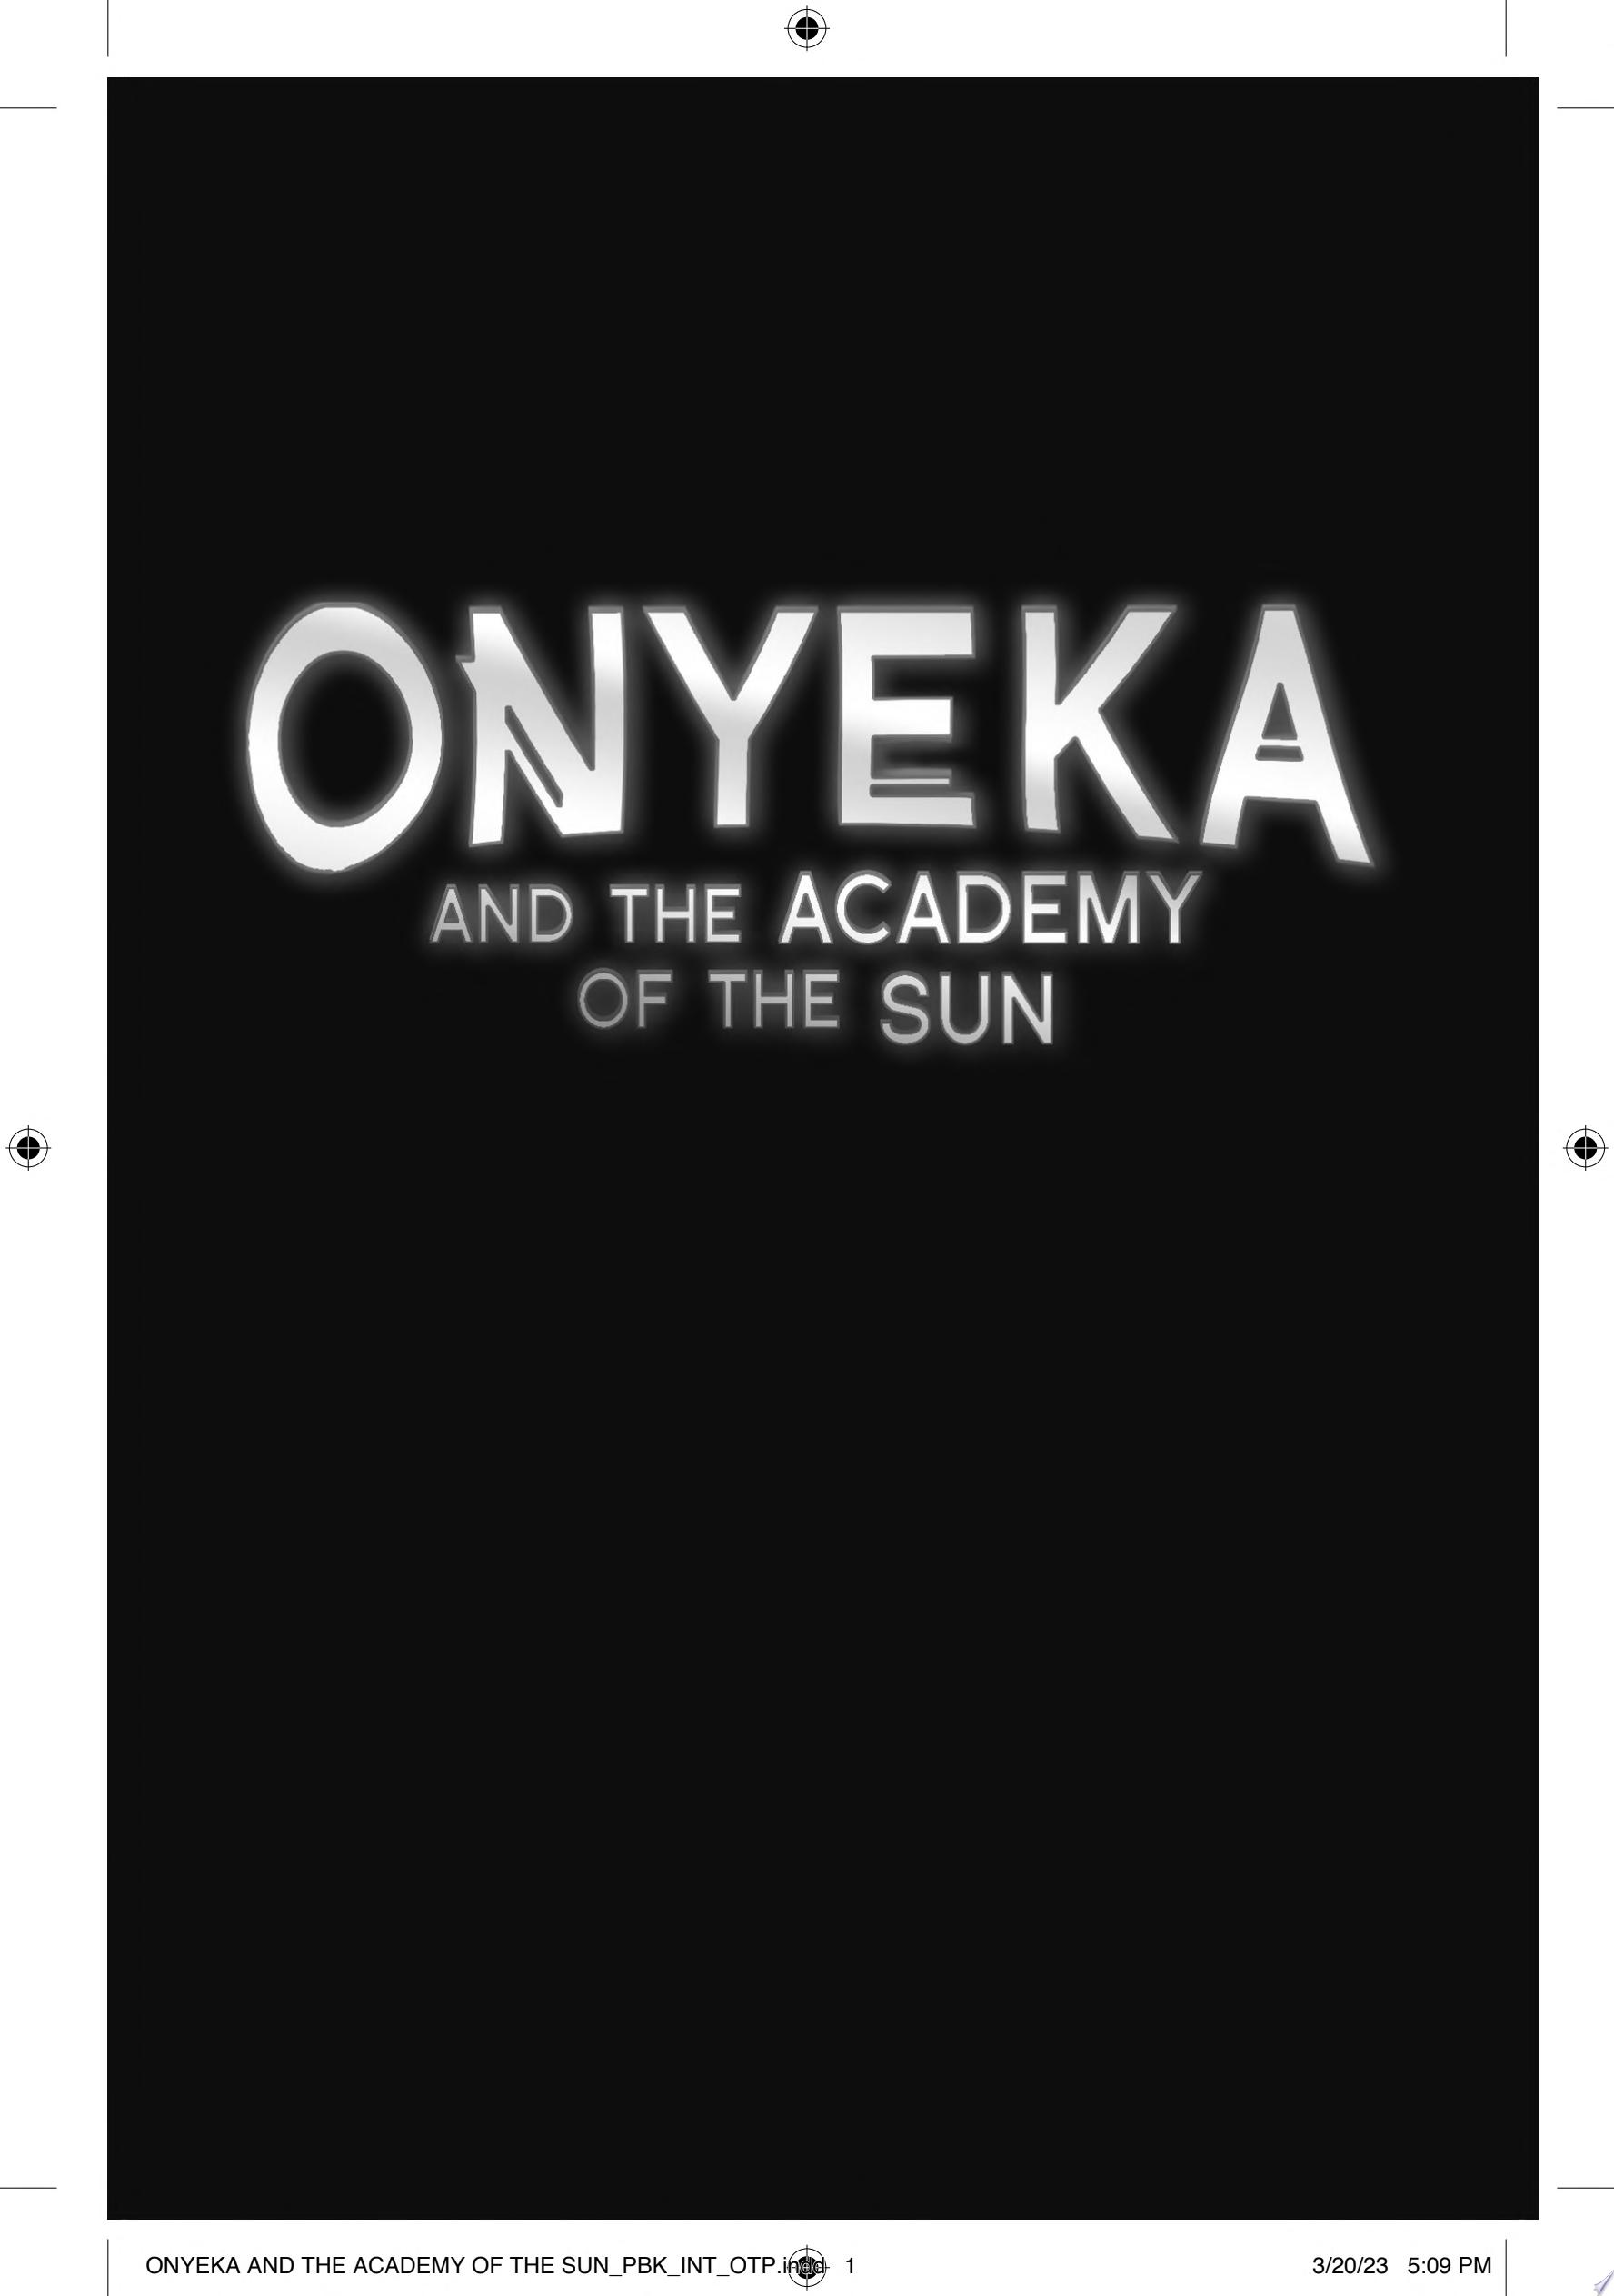 Image for "Onyeka and the Academy of the Sun"